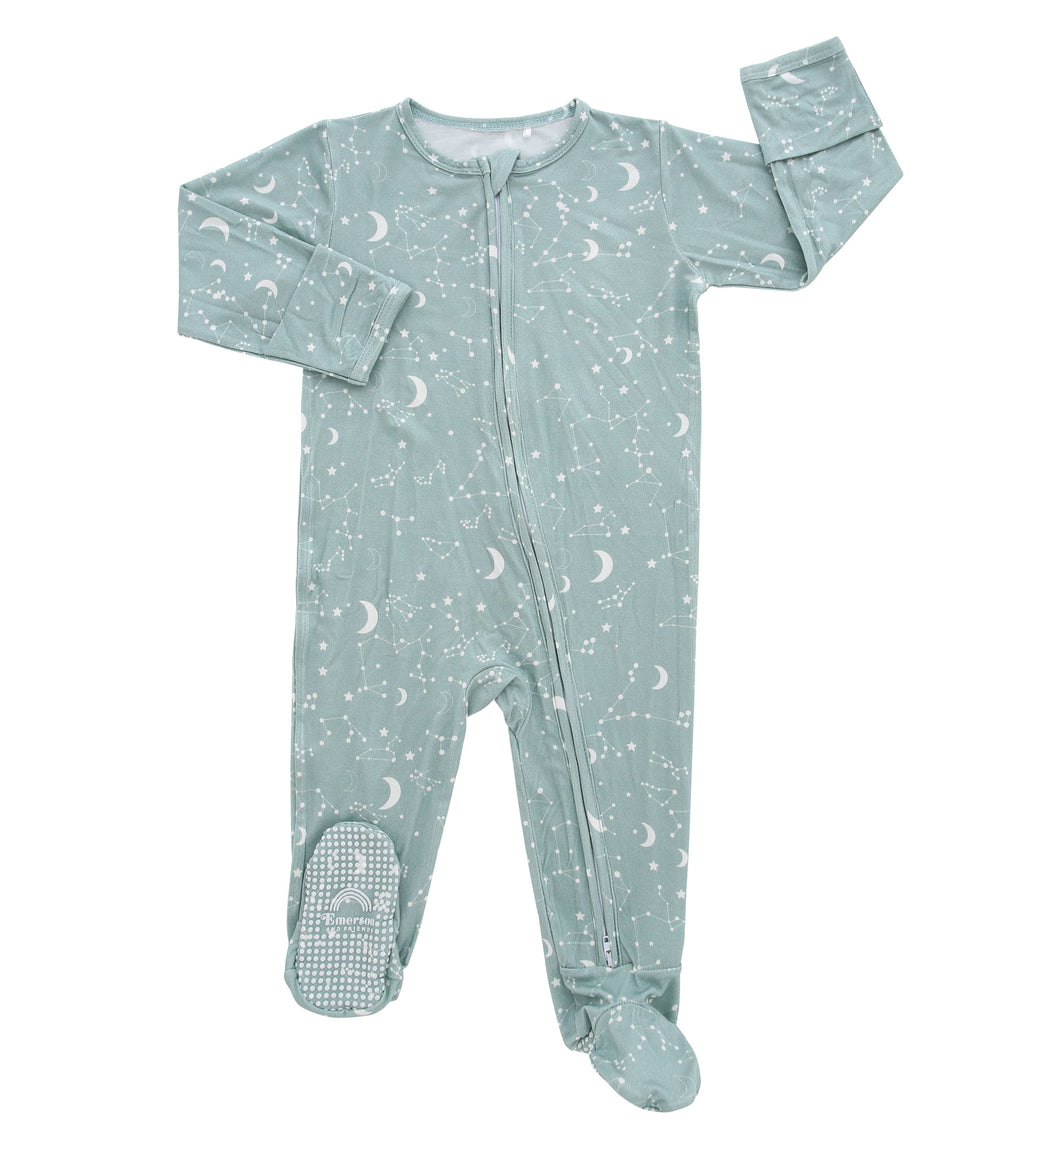 Stargazer Bamboo Baby Footed Pajamas - Emerson & Friends